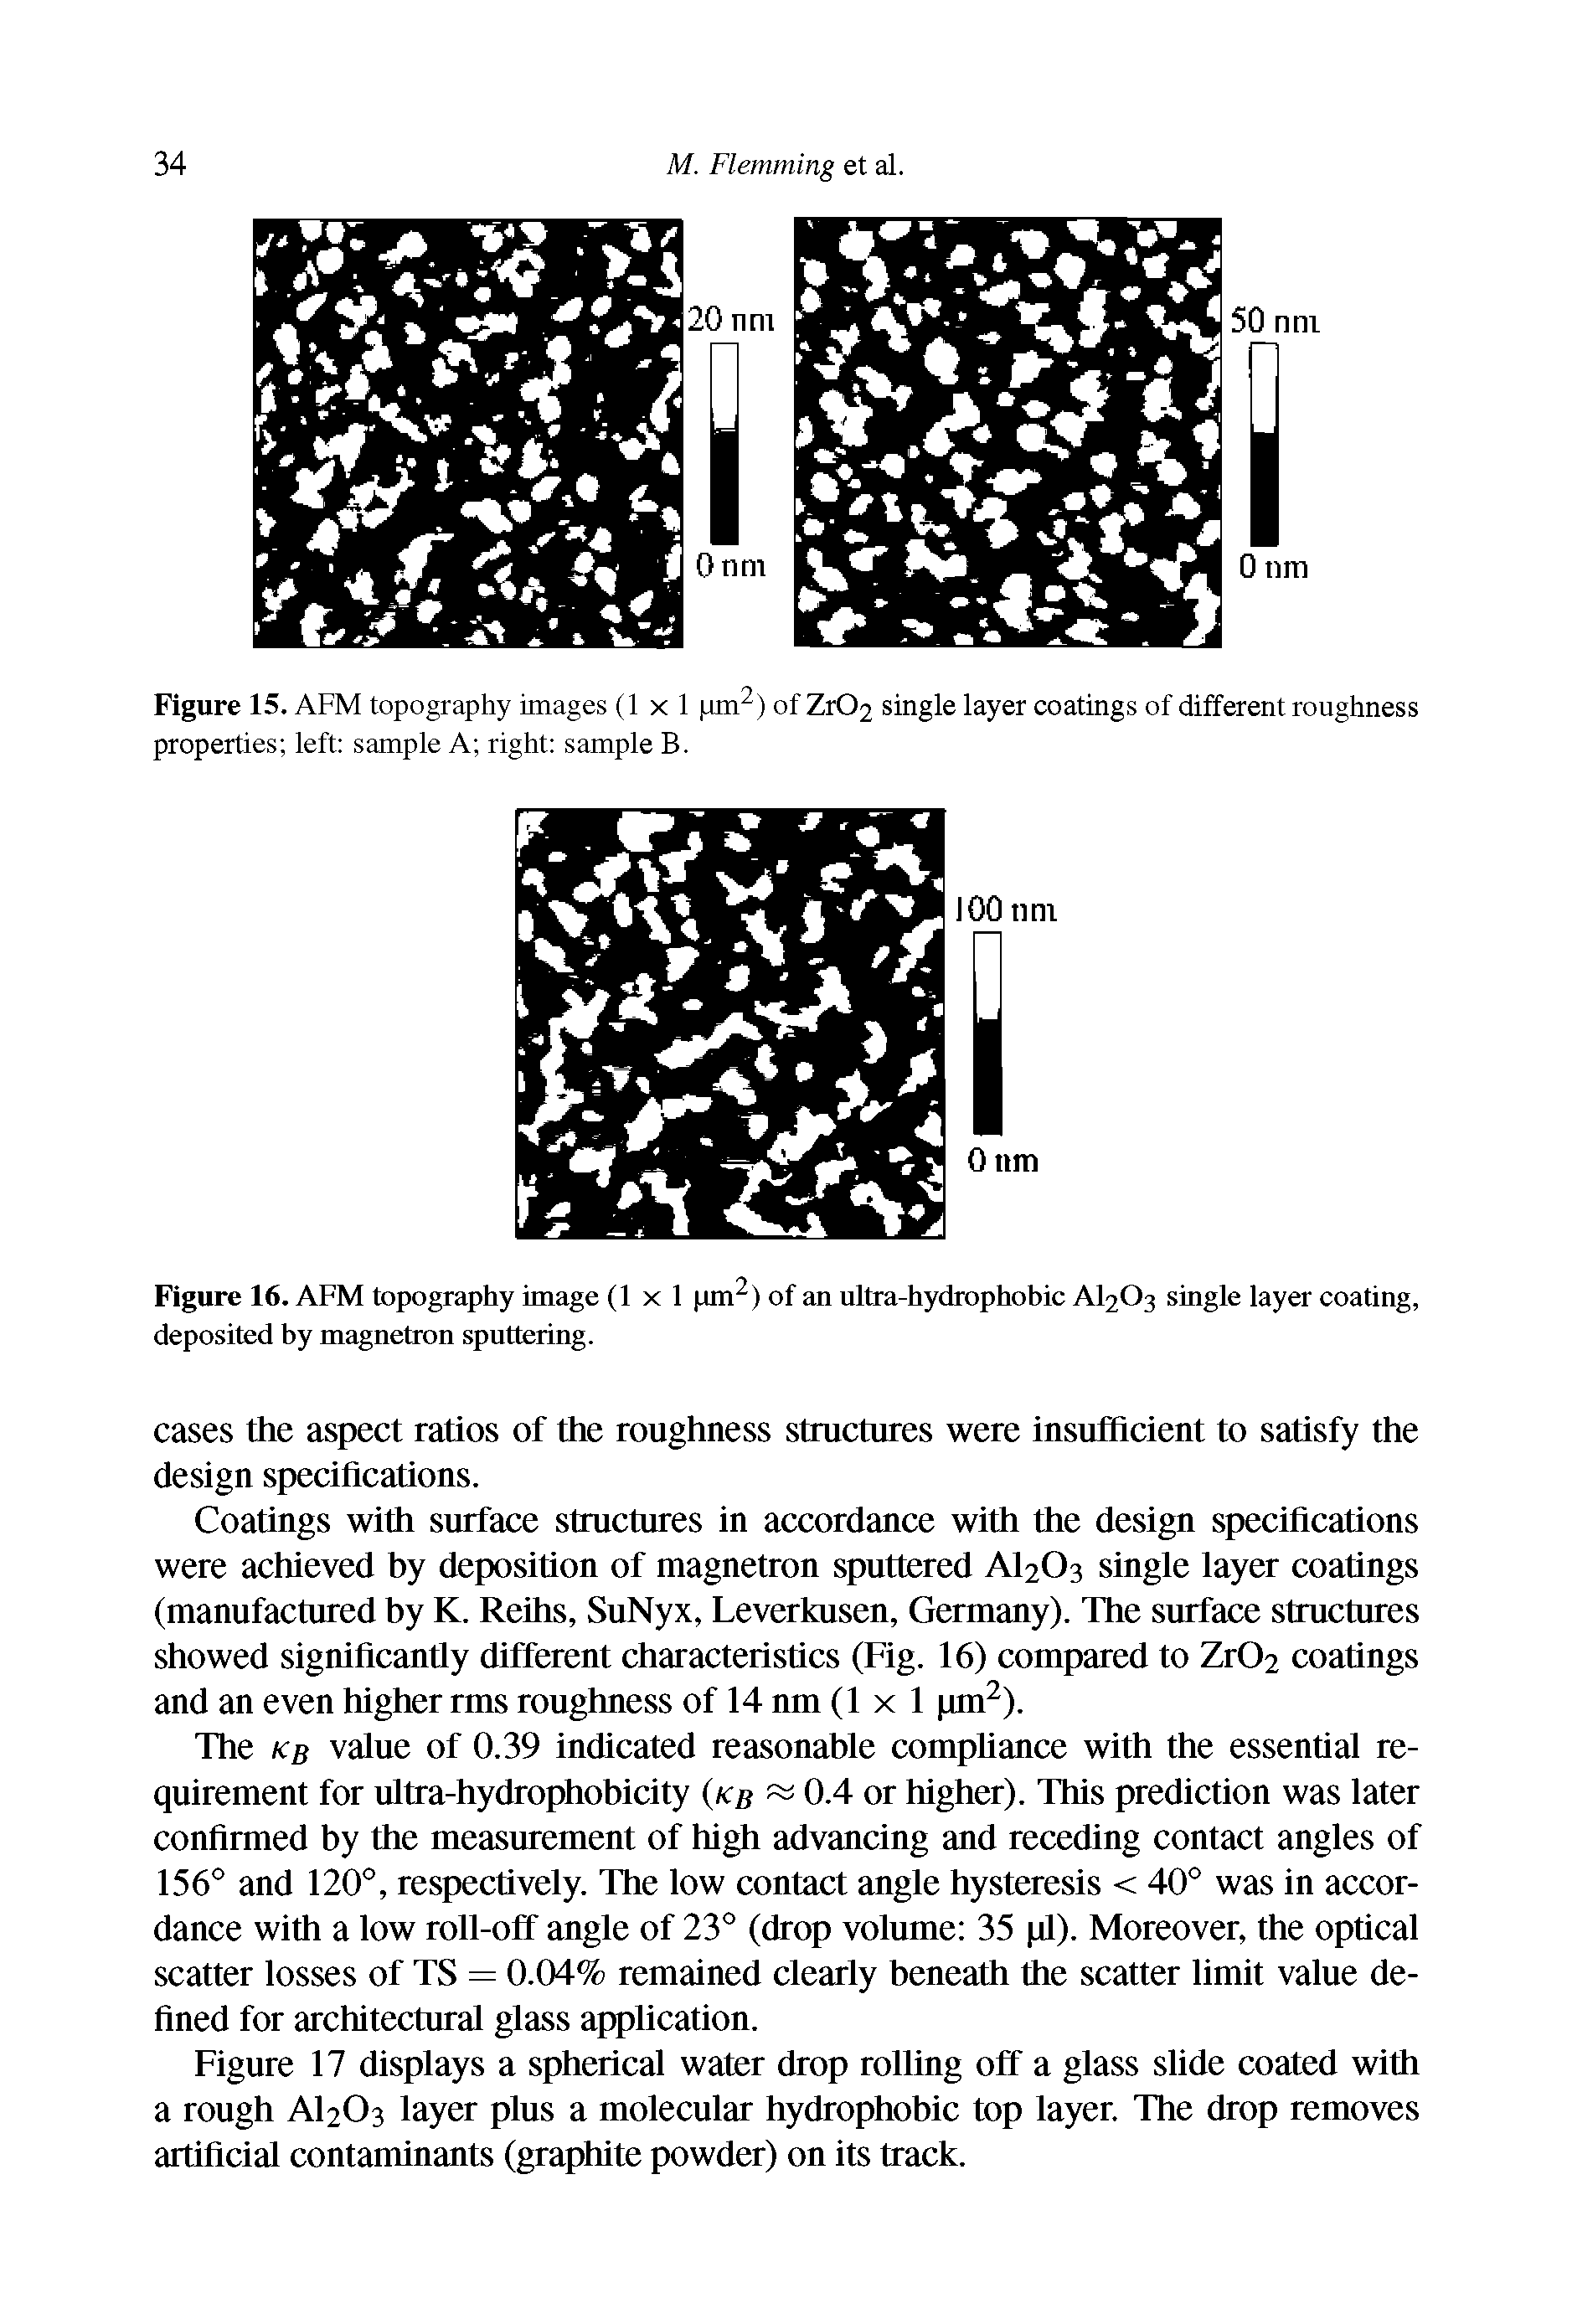 Figure 16. AFM topography image (1x1 pm ) of an ultra-hydrophobic AI2O3 single layer coating, deposited by magnetron sputtering.